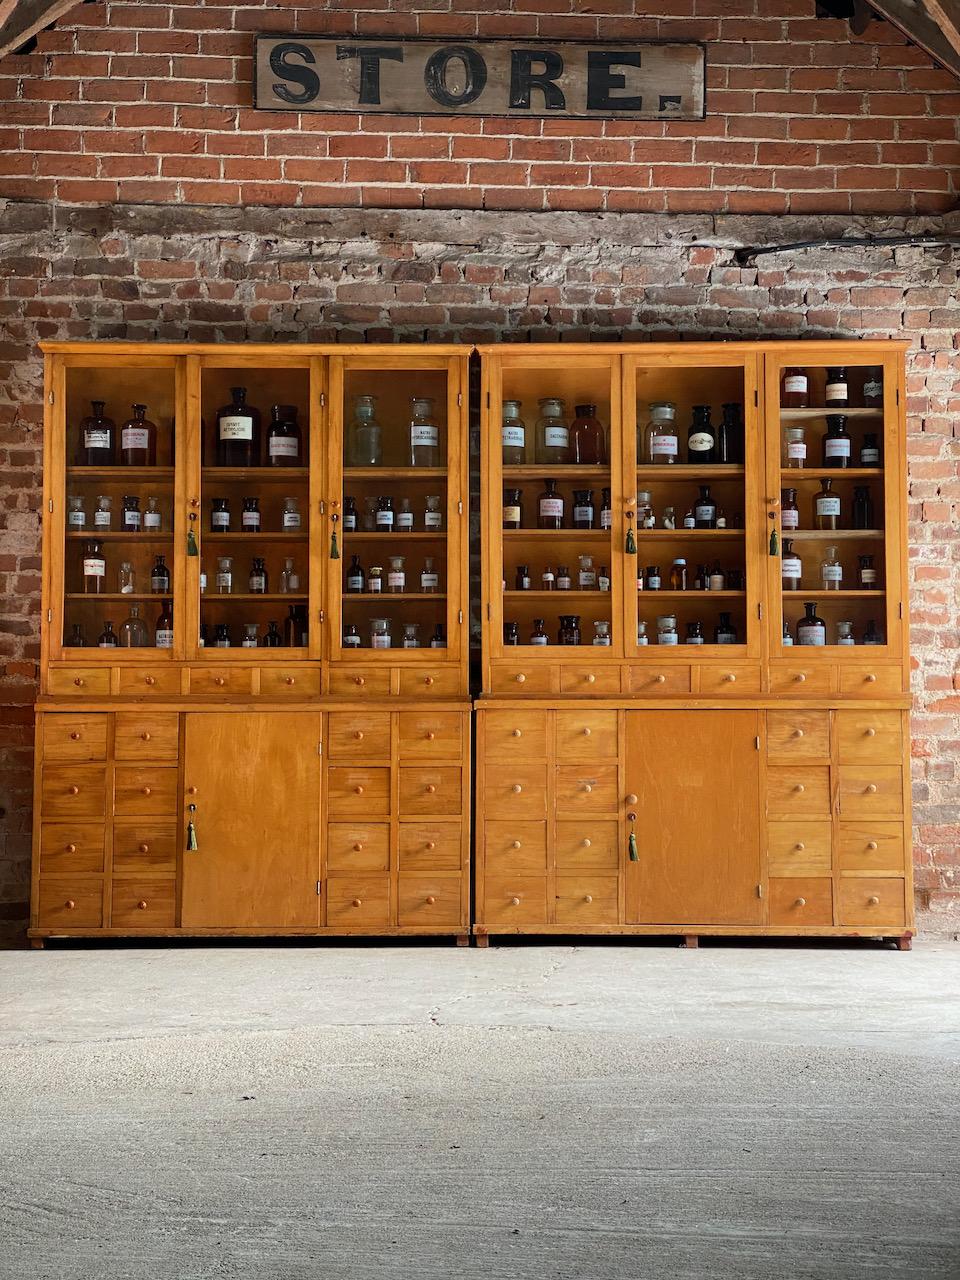 Pair of apothecary display cabinets Ukraine circa 1930s number 20

Apothecary / pharmacy / chemist / shop display / restaurant cabinet, circa 1930s

Fabulous pair of Apothecary Pharmacy beech display cabinets dating to circa 1930s, the upper